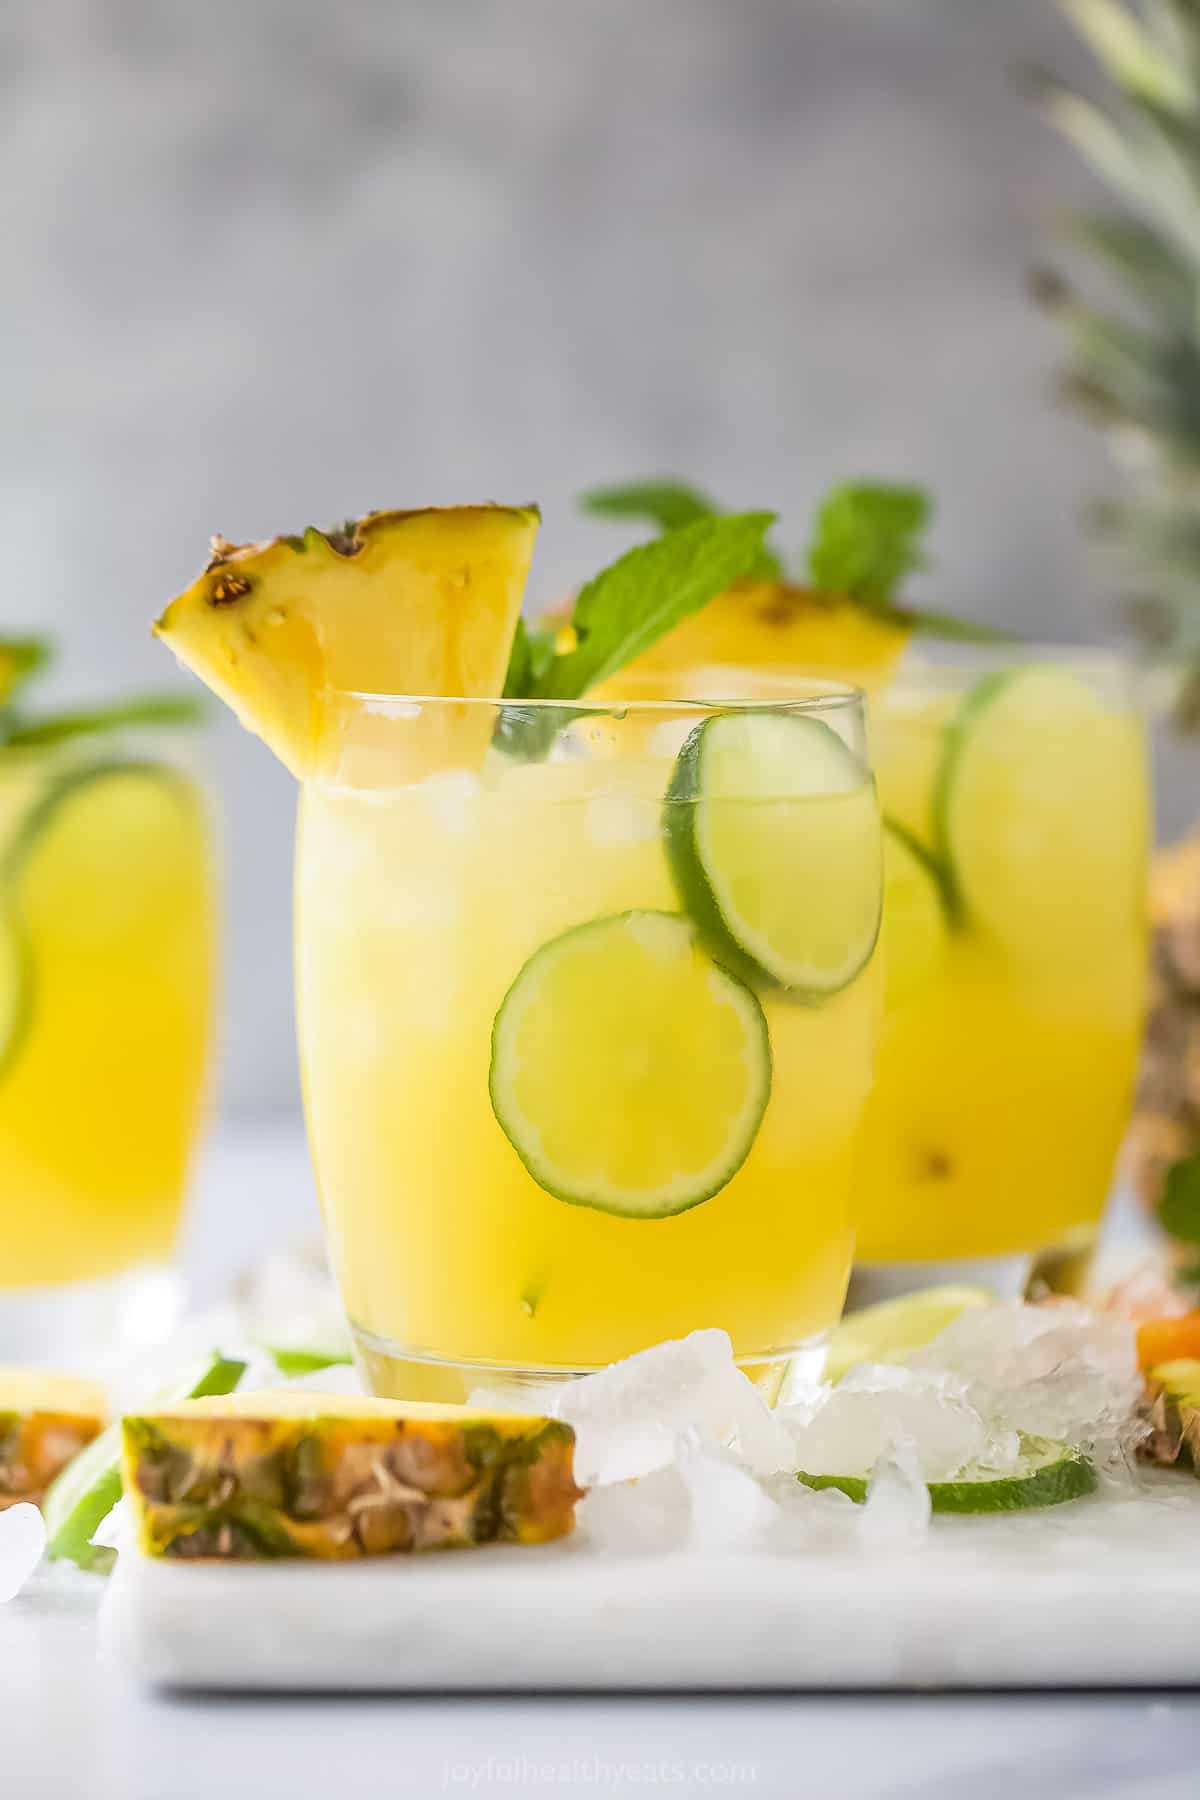 Easy Pineapple Rum Punch Recipe - Ethical Today